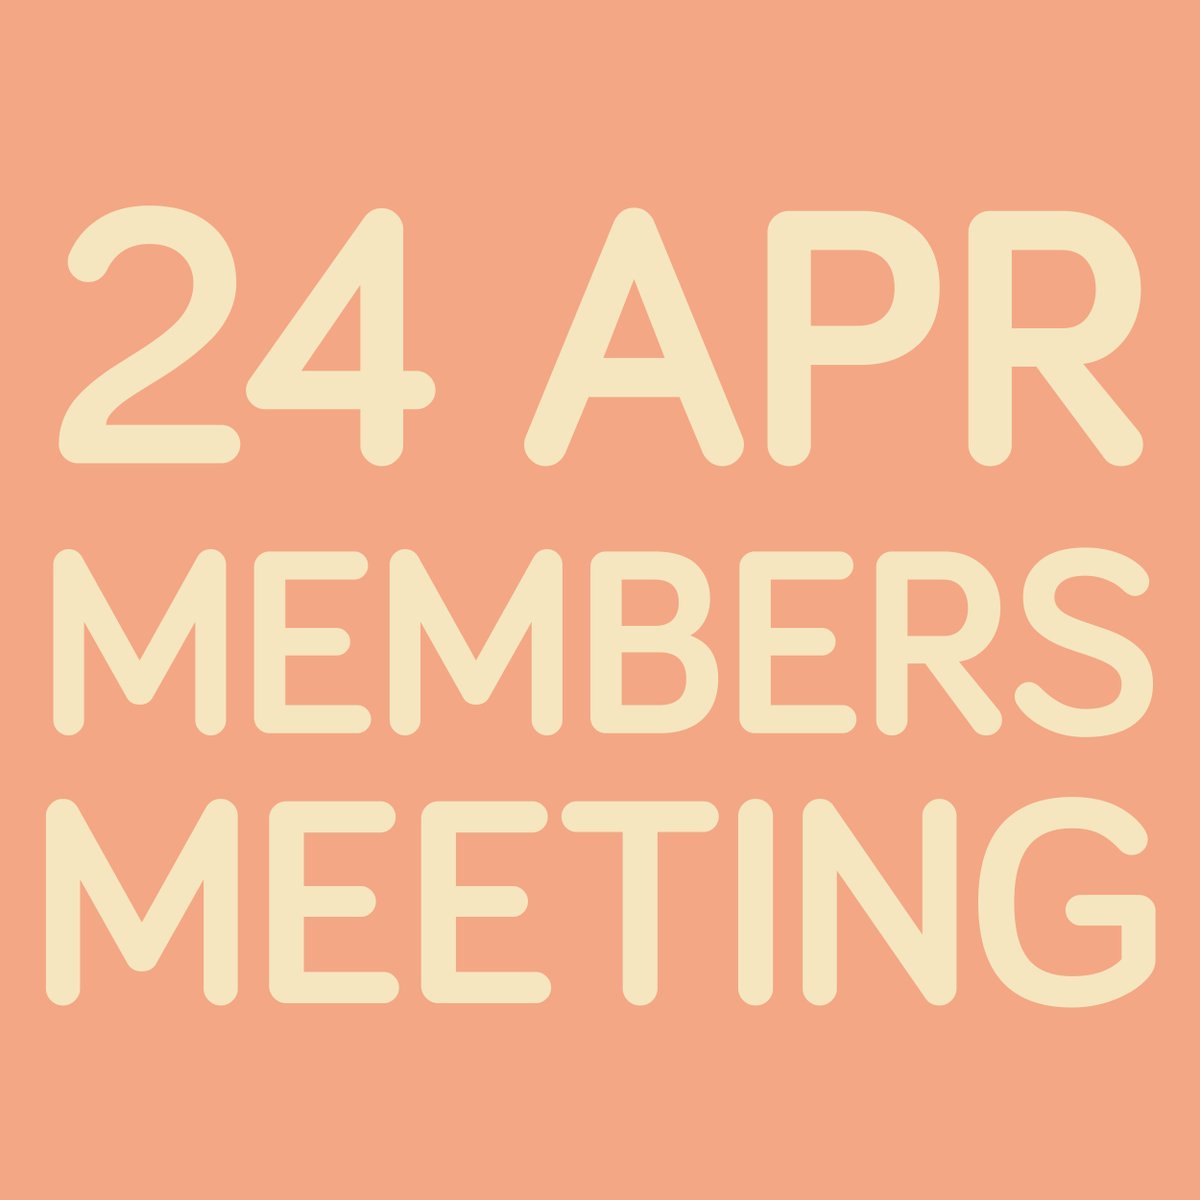 We look forward to seeing JCF Members at our regular monthly meeting on Wednesday, 24th April, at St Helier Parish Hall between 09.30 - 11.00. You can find the agenda for this month here - loom.ly/Jl9508I